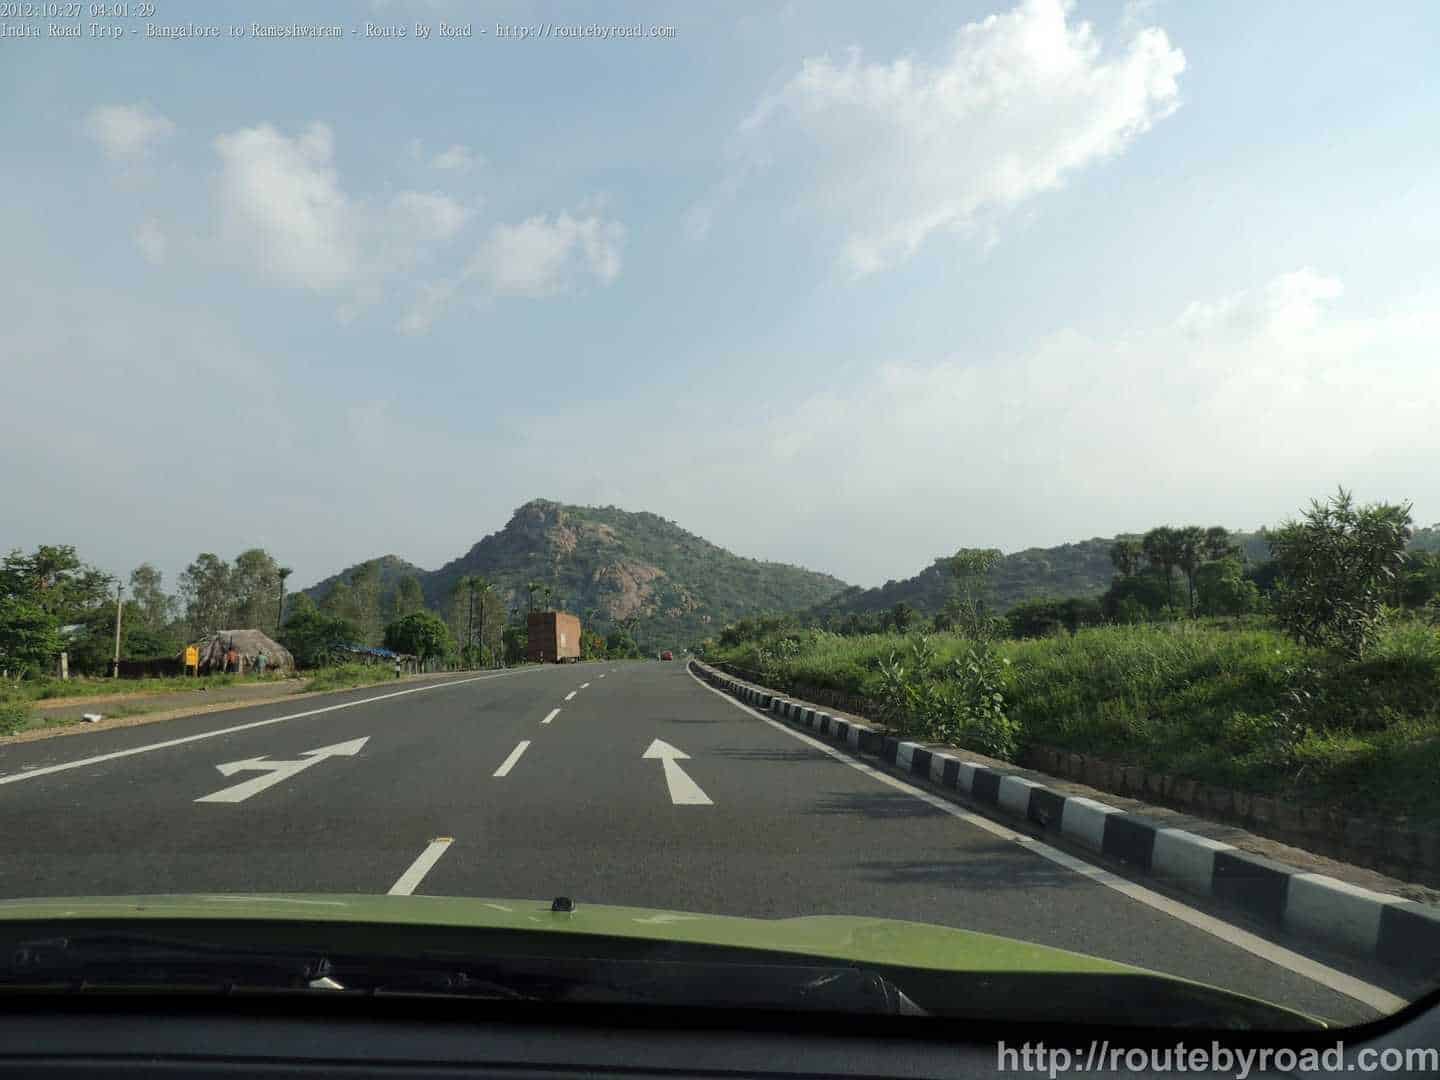 ALL INDIA ROAD TRIP - ROUTE INFORMATION 1